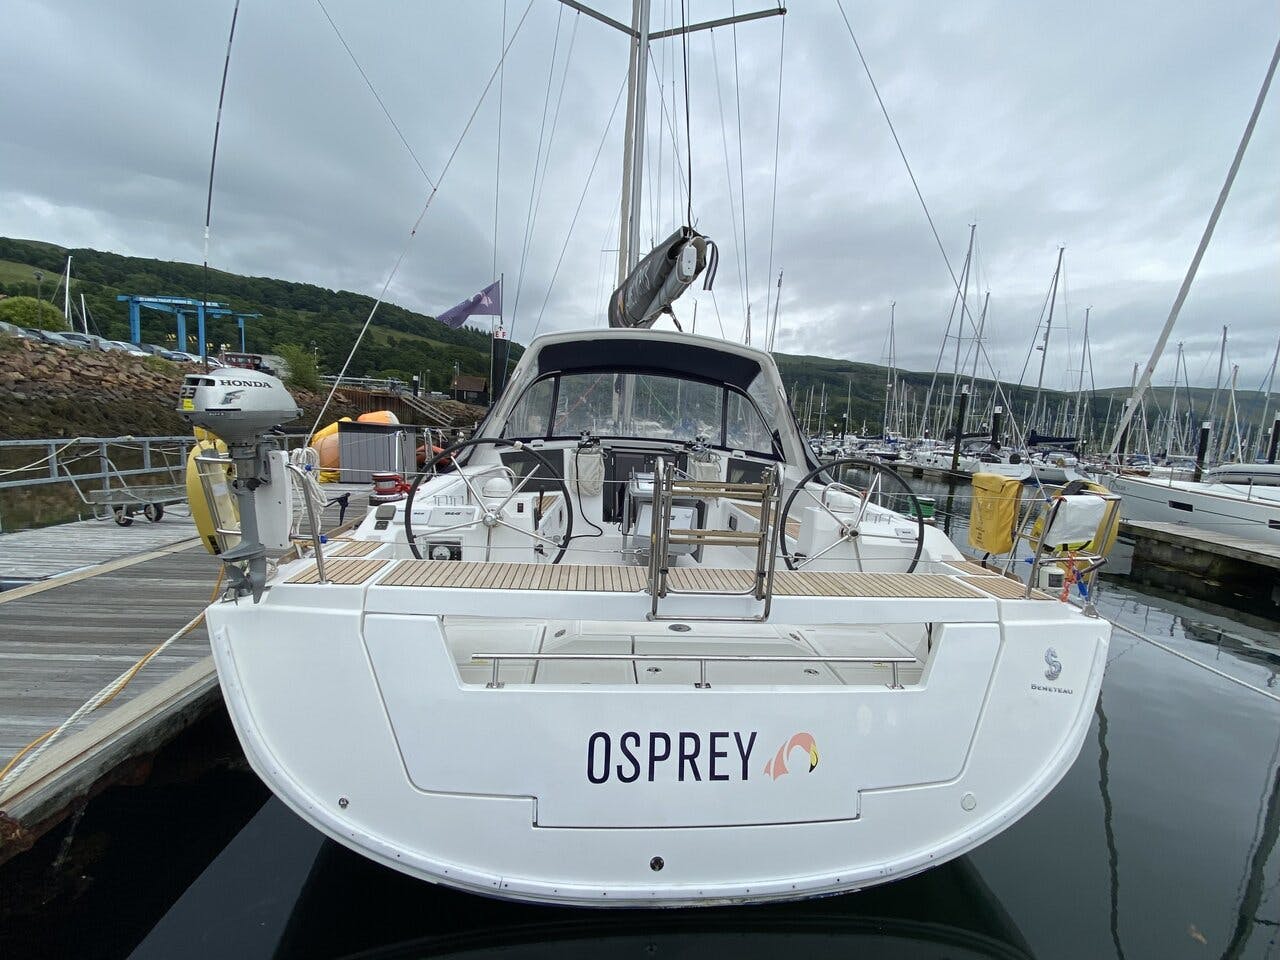 Book Oceanis 45 - 4 cab. Sailing yacht for bareboat charter in Largs Yacht Haven, North Ayrshire, Scotland, UK  with TripYacht!, picture 1